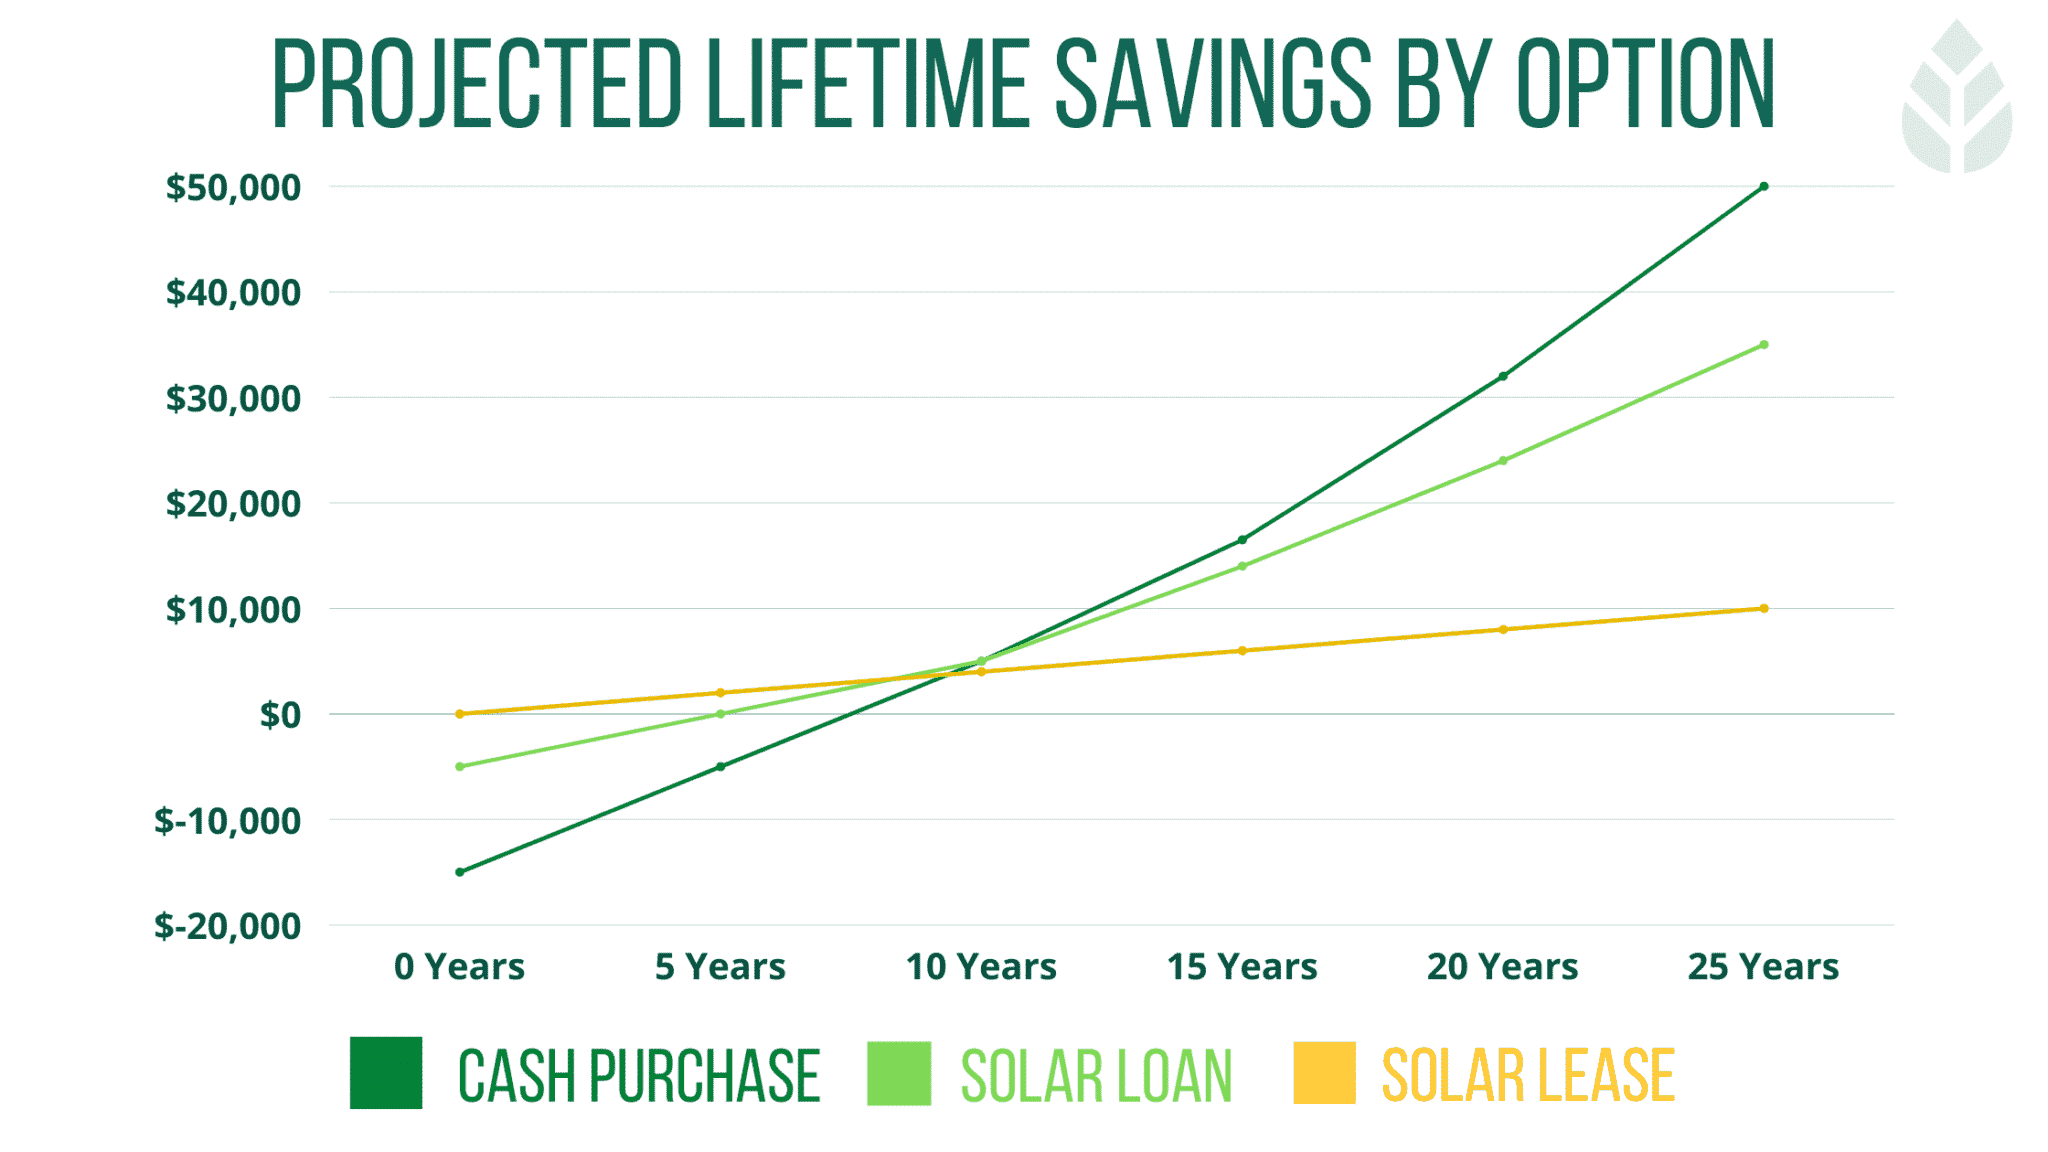 Chart with projected lifetime savings of cash purchase of solar panels, solar loan or solar lease